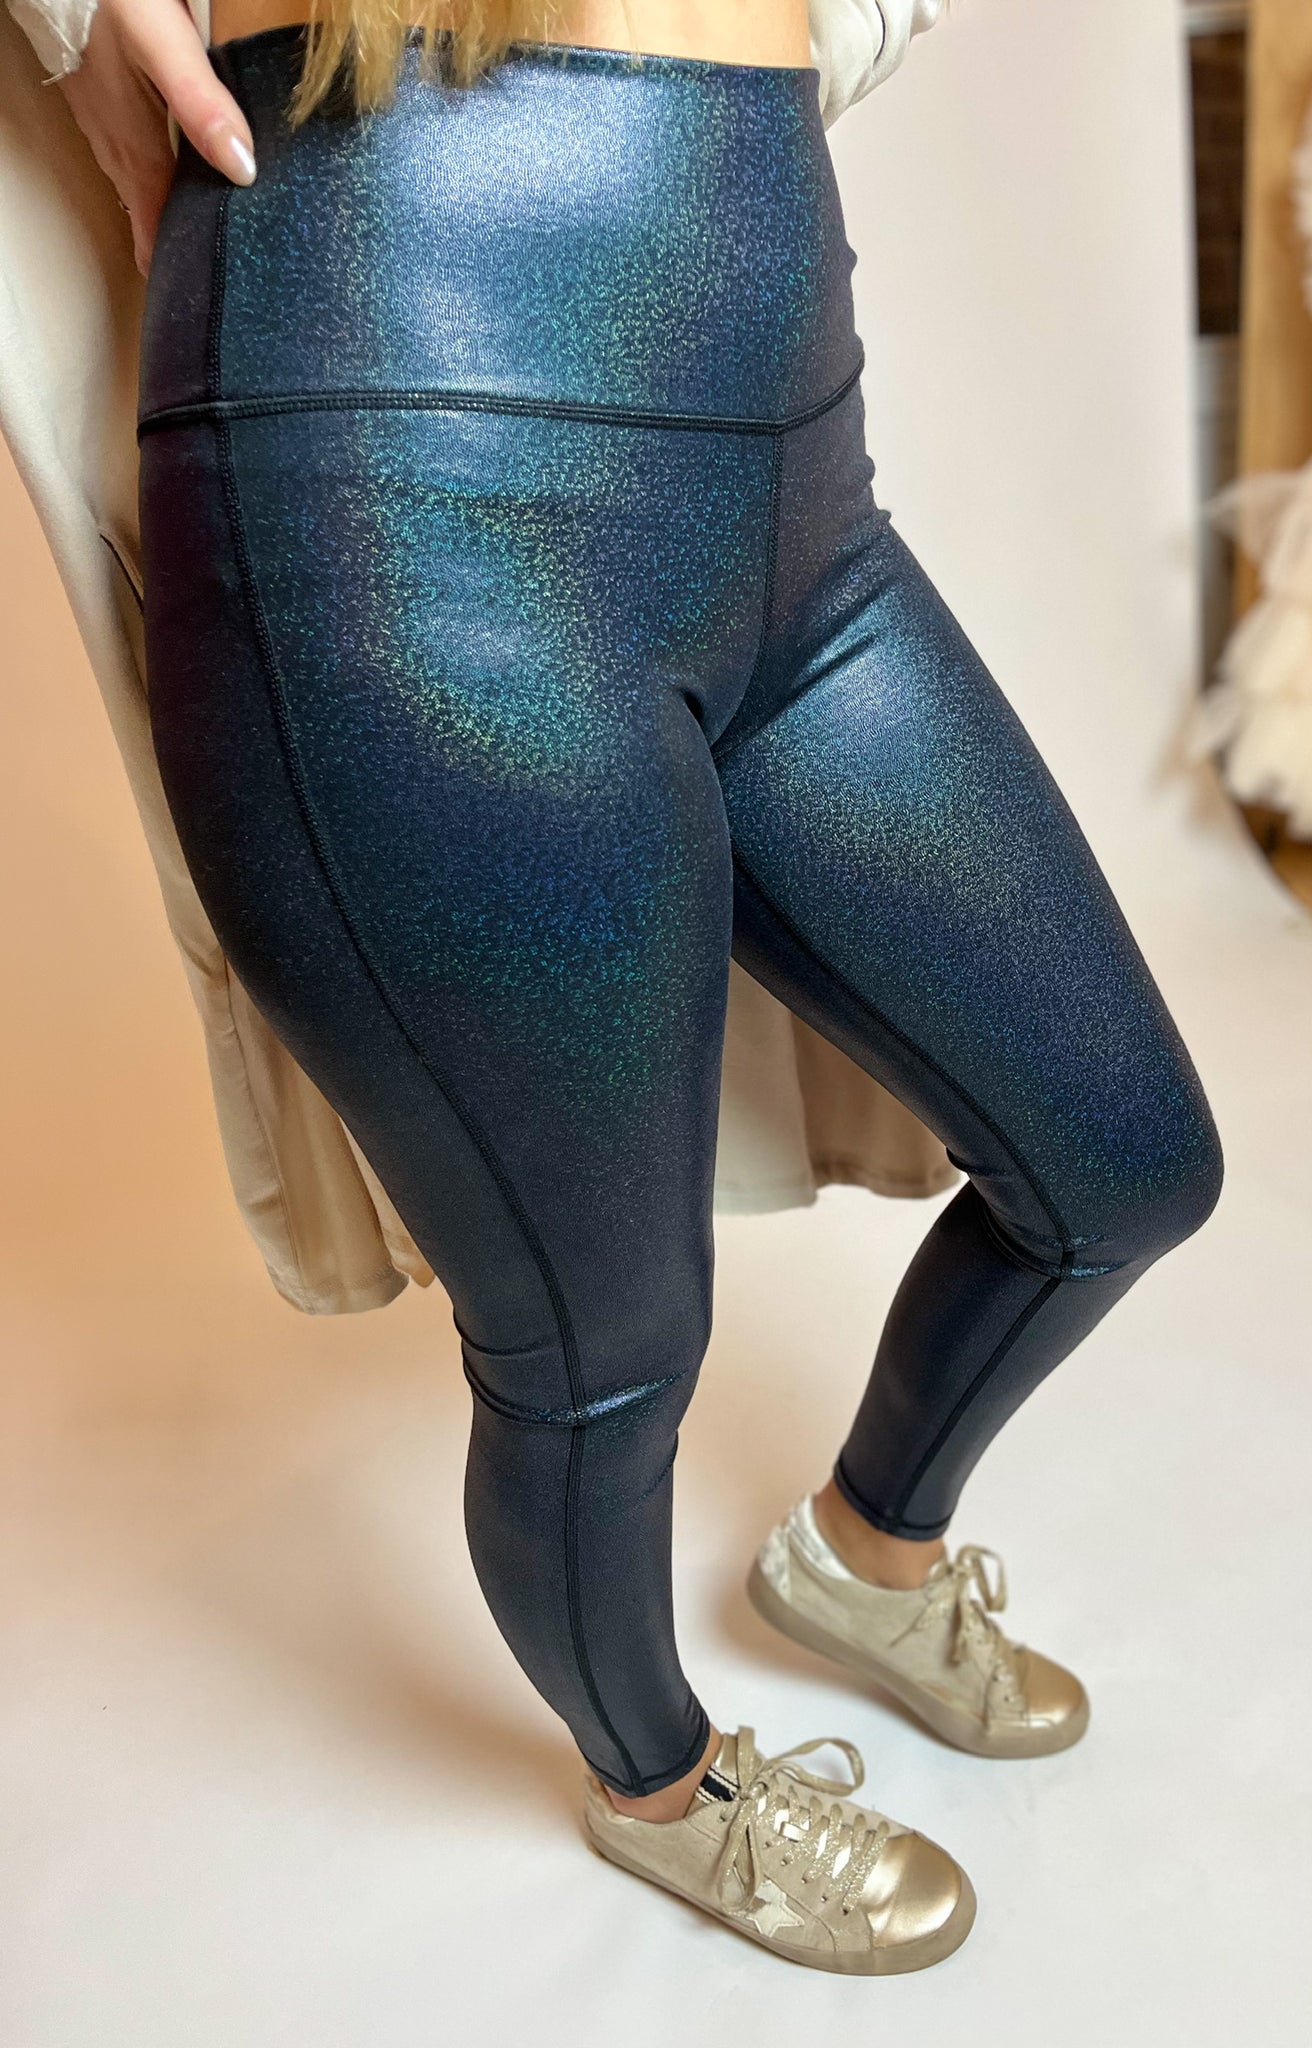 Kids / Childrens Holographic Black Sparkly Leggings – Disco Baby